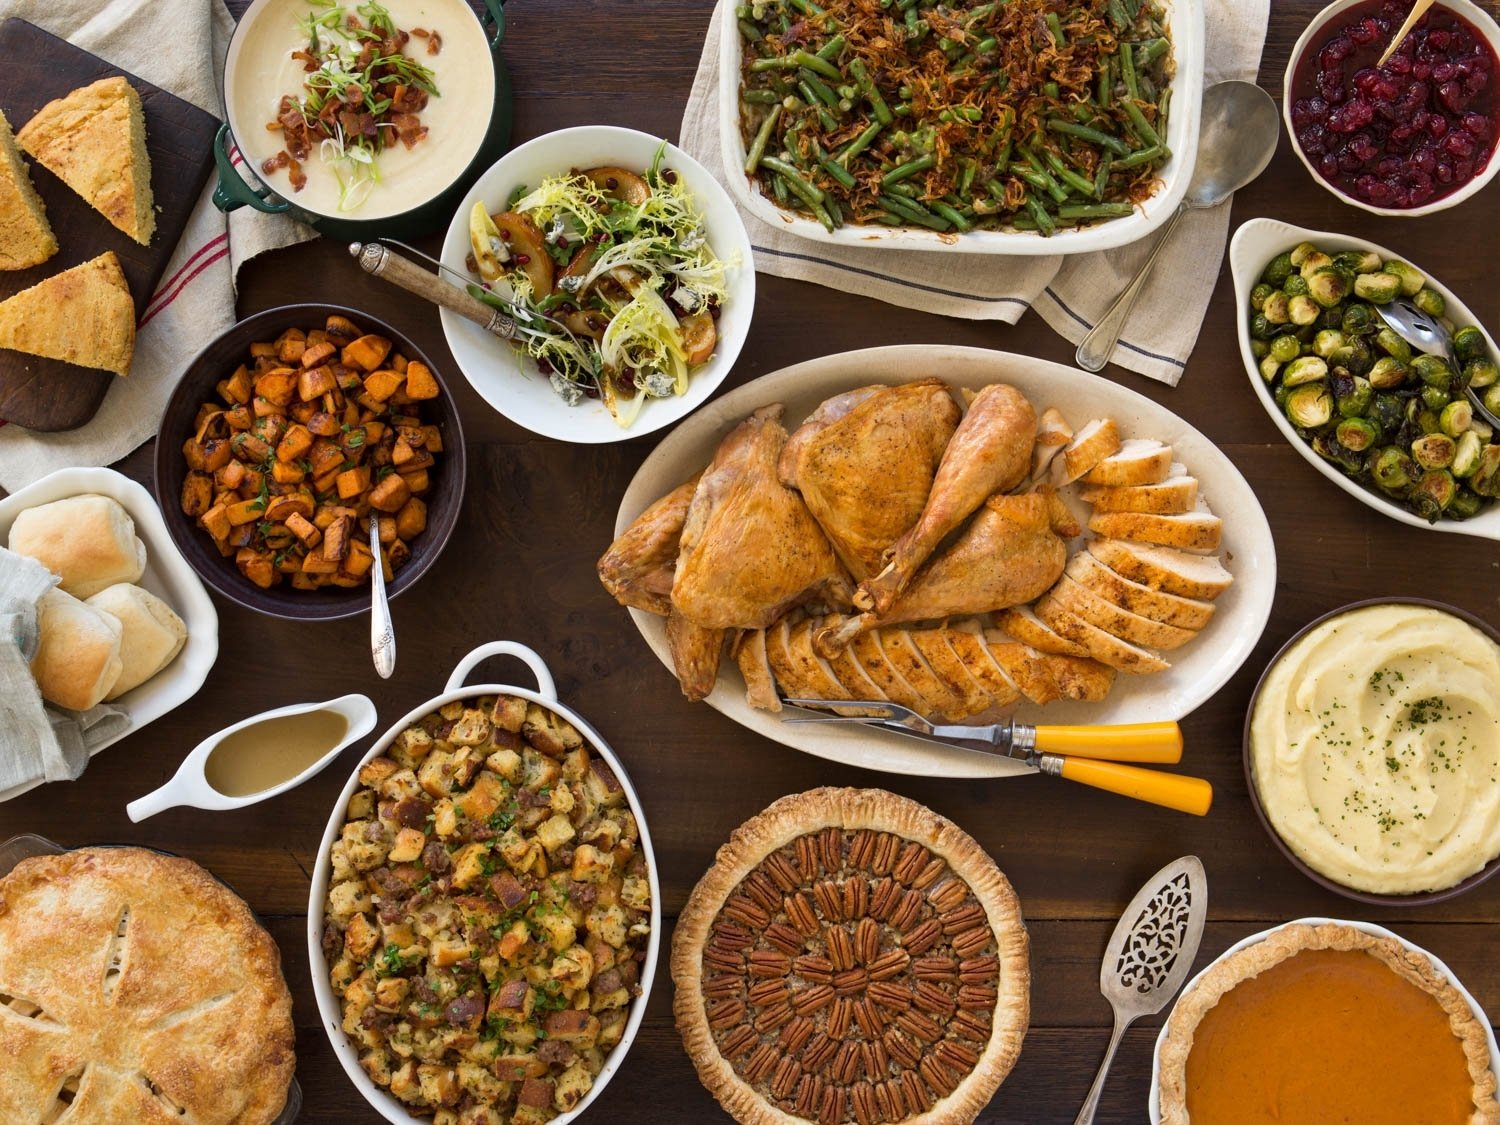 10 Wonderful Menu Ideas For A Crowd a classic thanksgiving menu to feed a crowd serious eats 2022